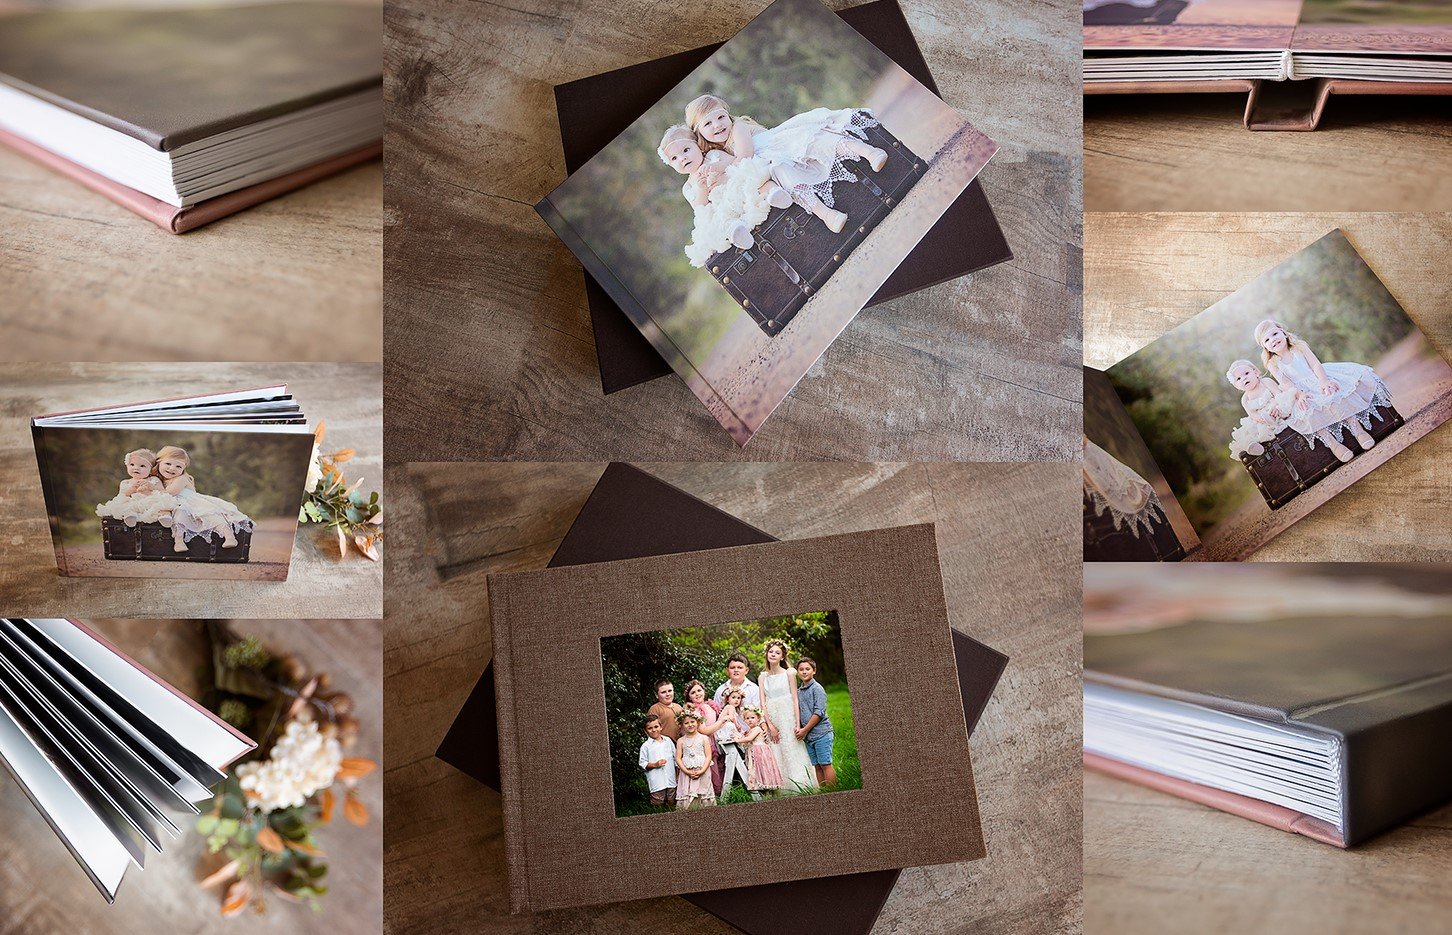 PRODUCT OF THE WEEK!!

If you simply can't choose just a few of your amazing family photos or what you would like to display on your walls, why not have your images arranged beautifully in our Heirloom Portrait Album? This way you can take them anywh